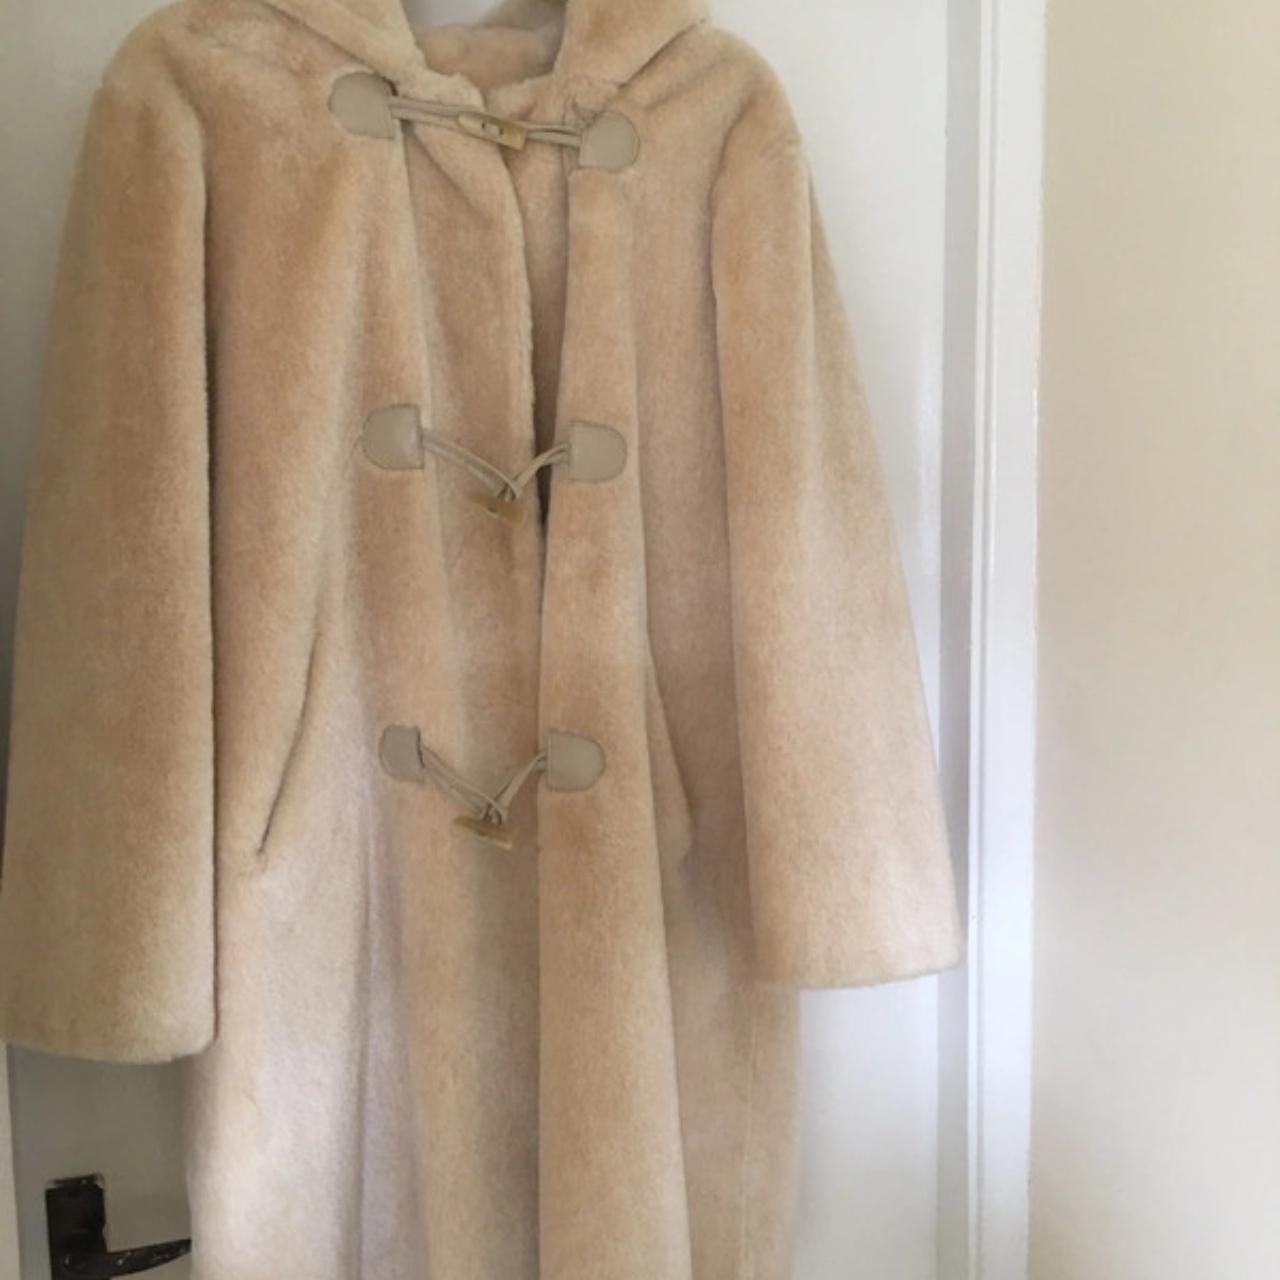 Stunning faux fur vintage cream coat with silky... - Depop